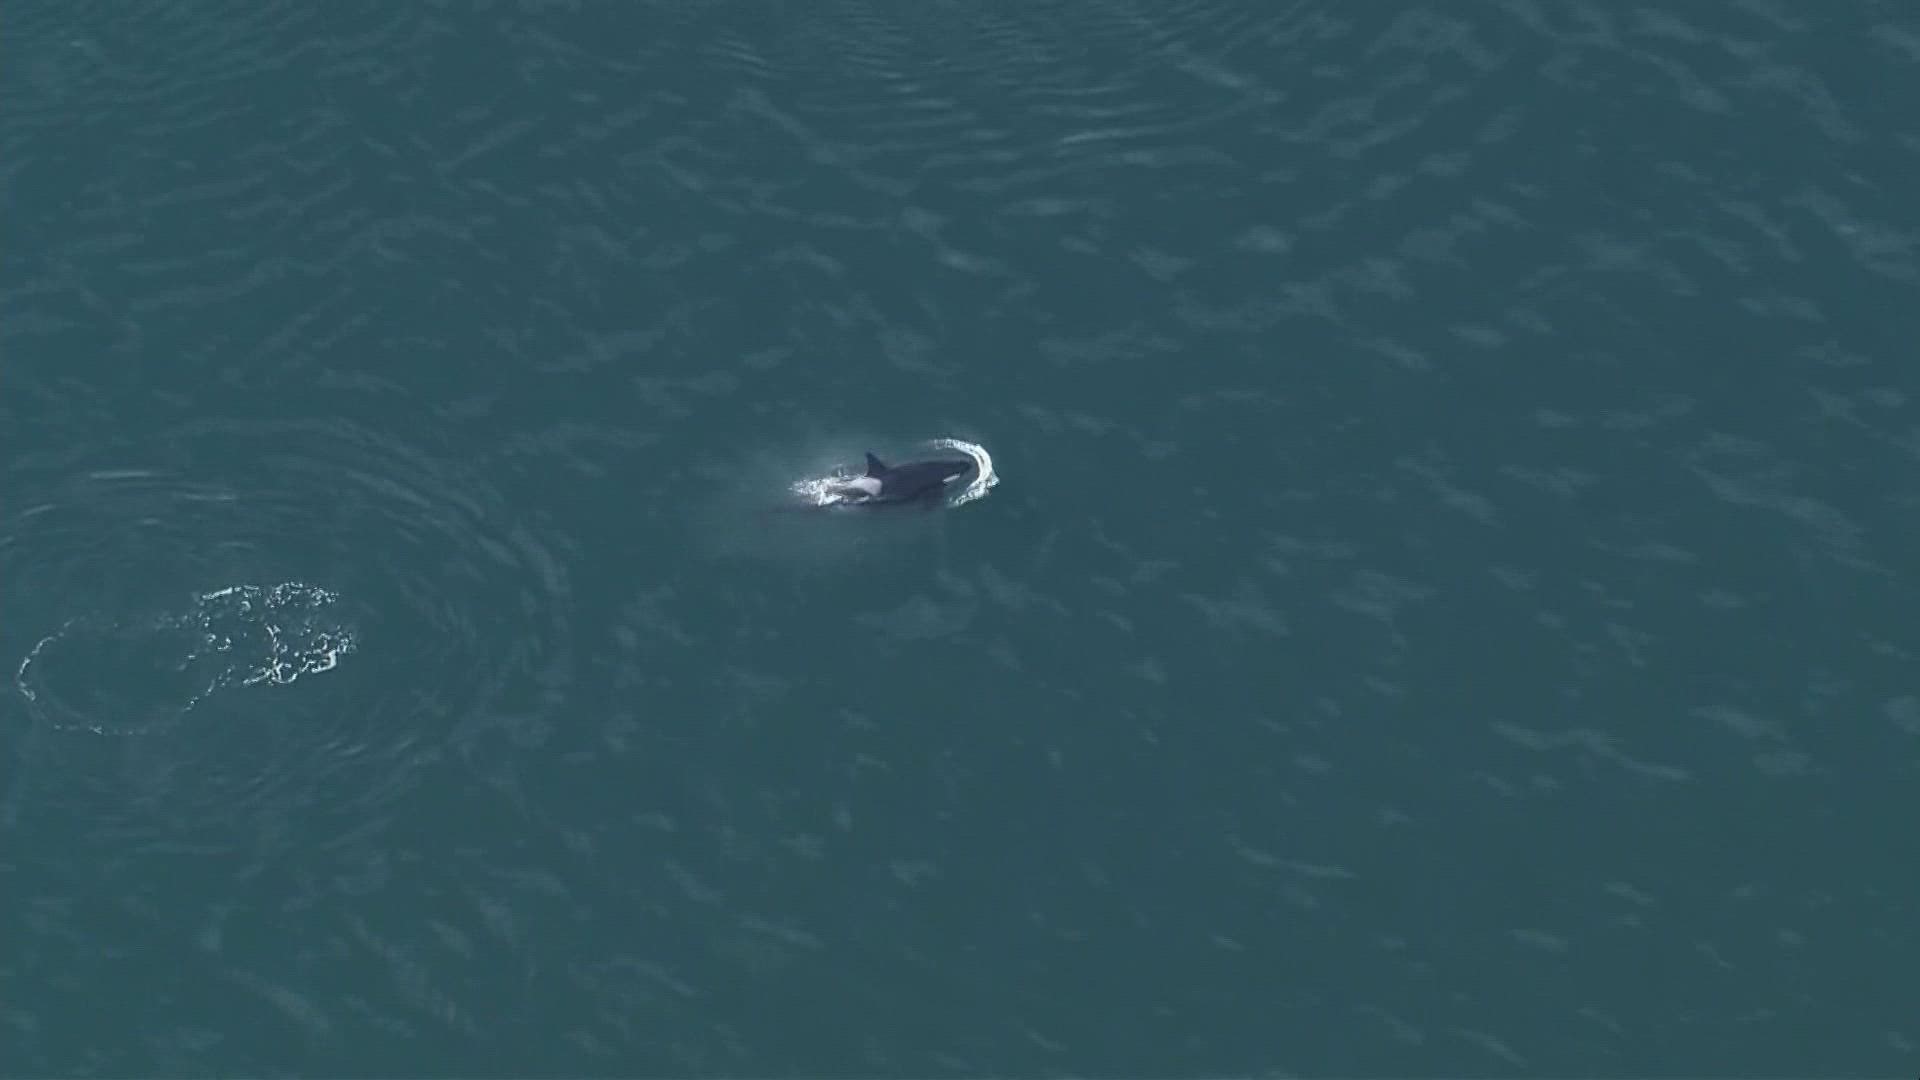 All three orca pods have been in the Puget Sound for over two weeks, according to the Orca Behavior Institute.